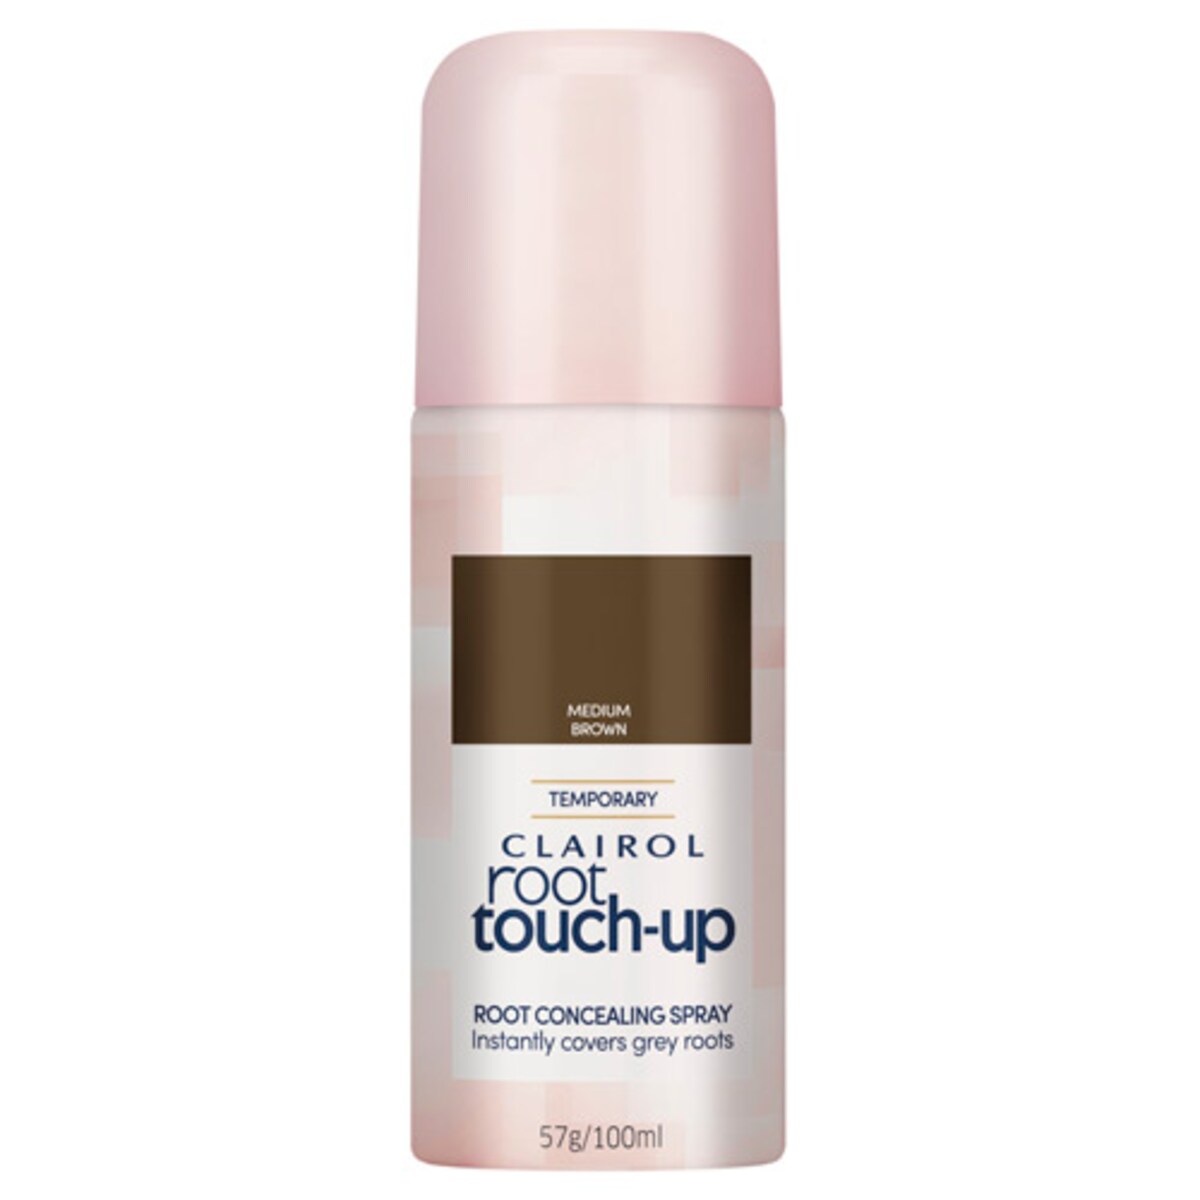 Clairol Root Touch Up Root Concealing Spray Medium Brown 100ml